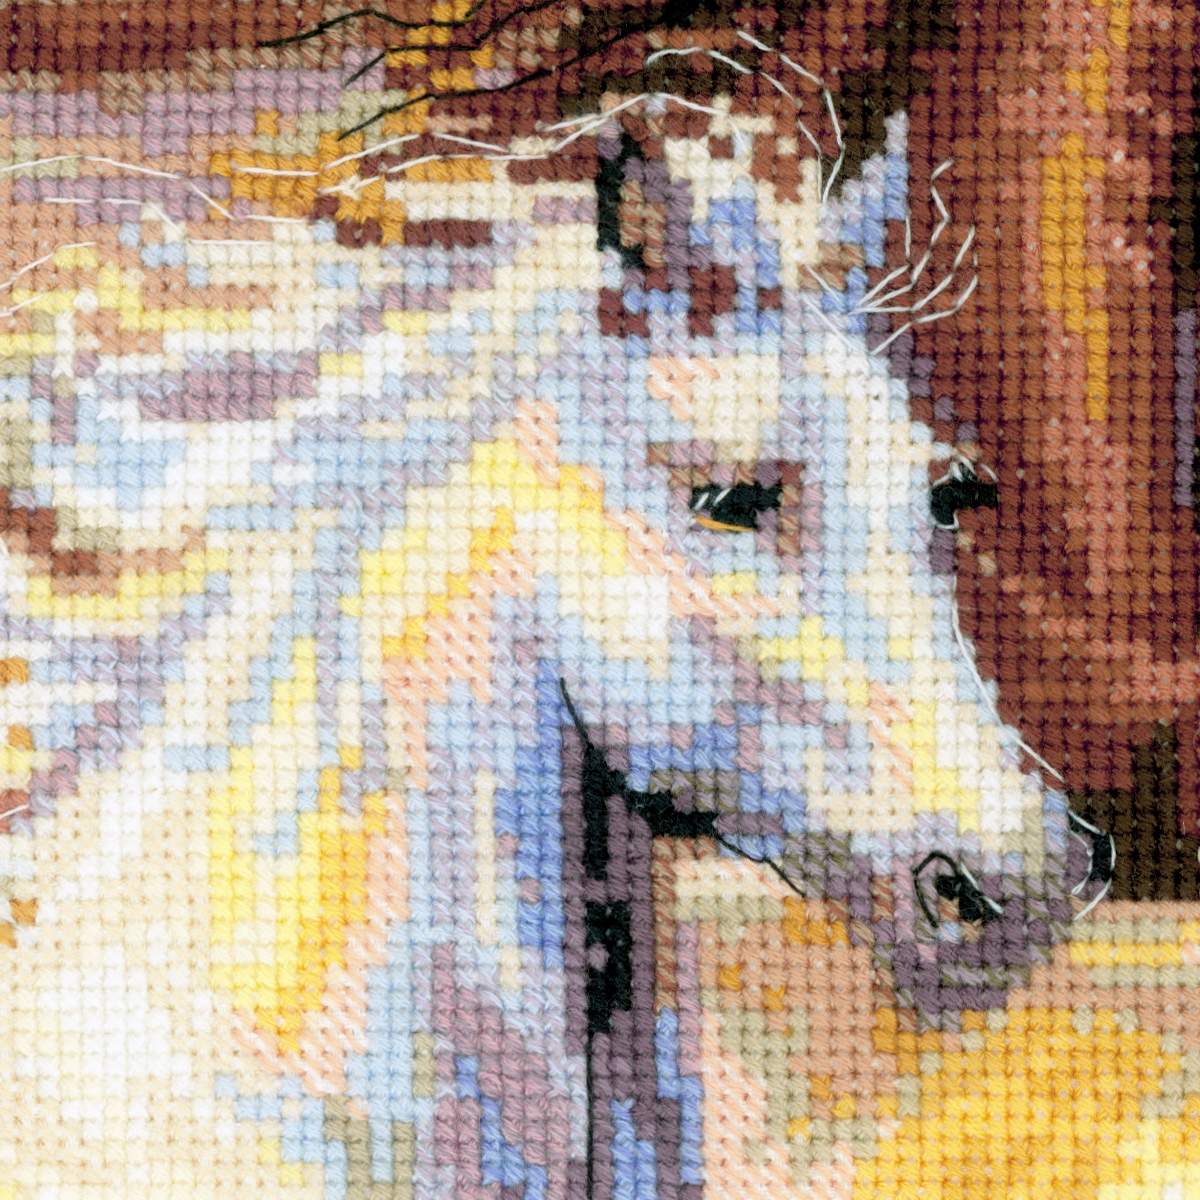 In The Sunset counted cross stitch kit